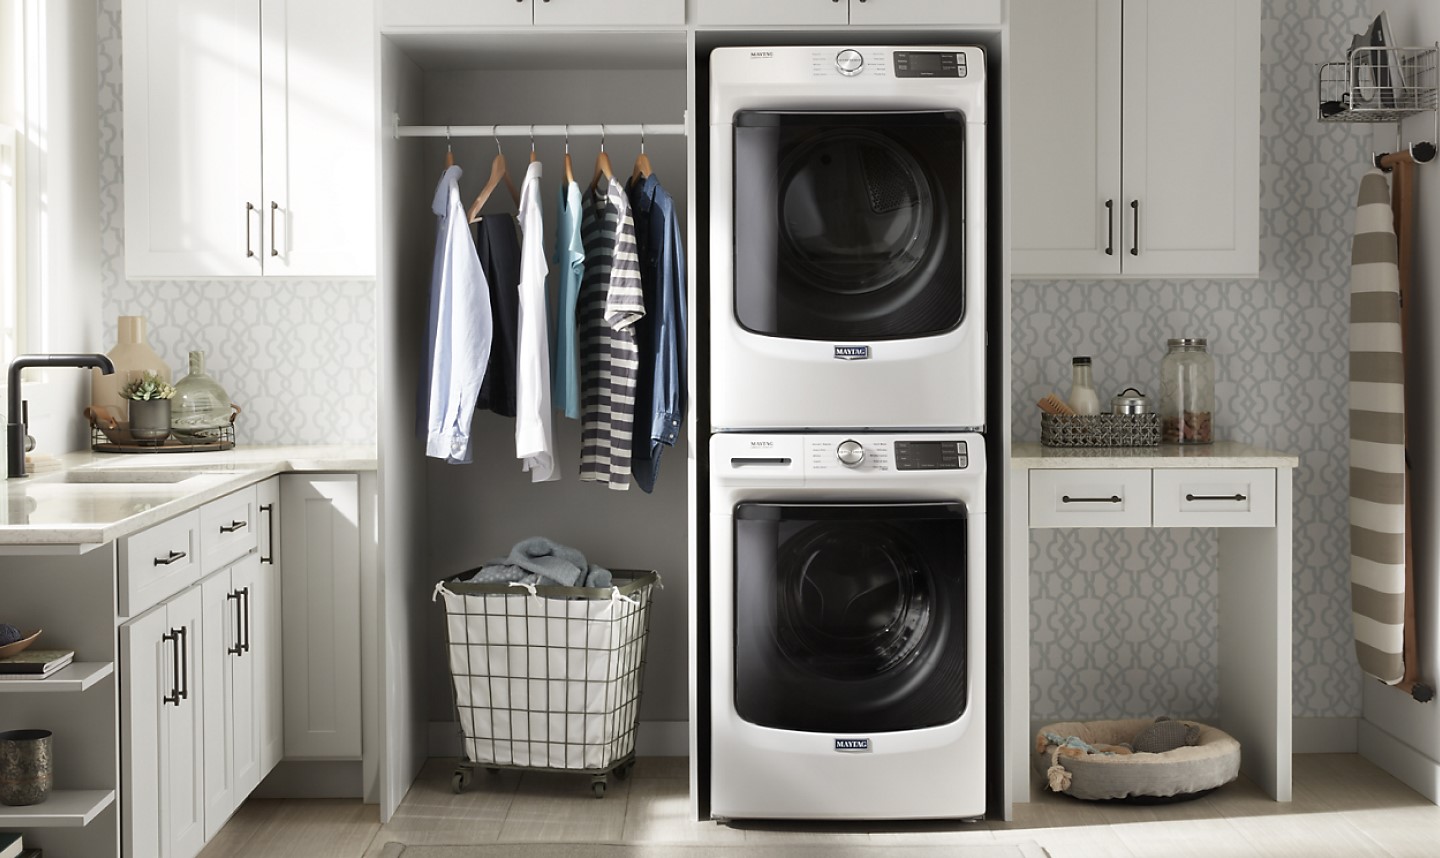 https://storables.com/wp-content/uploads/2023/08/9-amazing-washer-and-dryer-sets-for-2023-1691124648.jpg